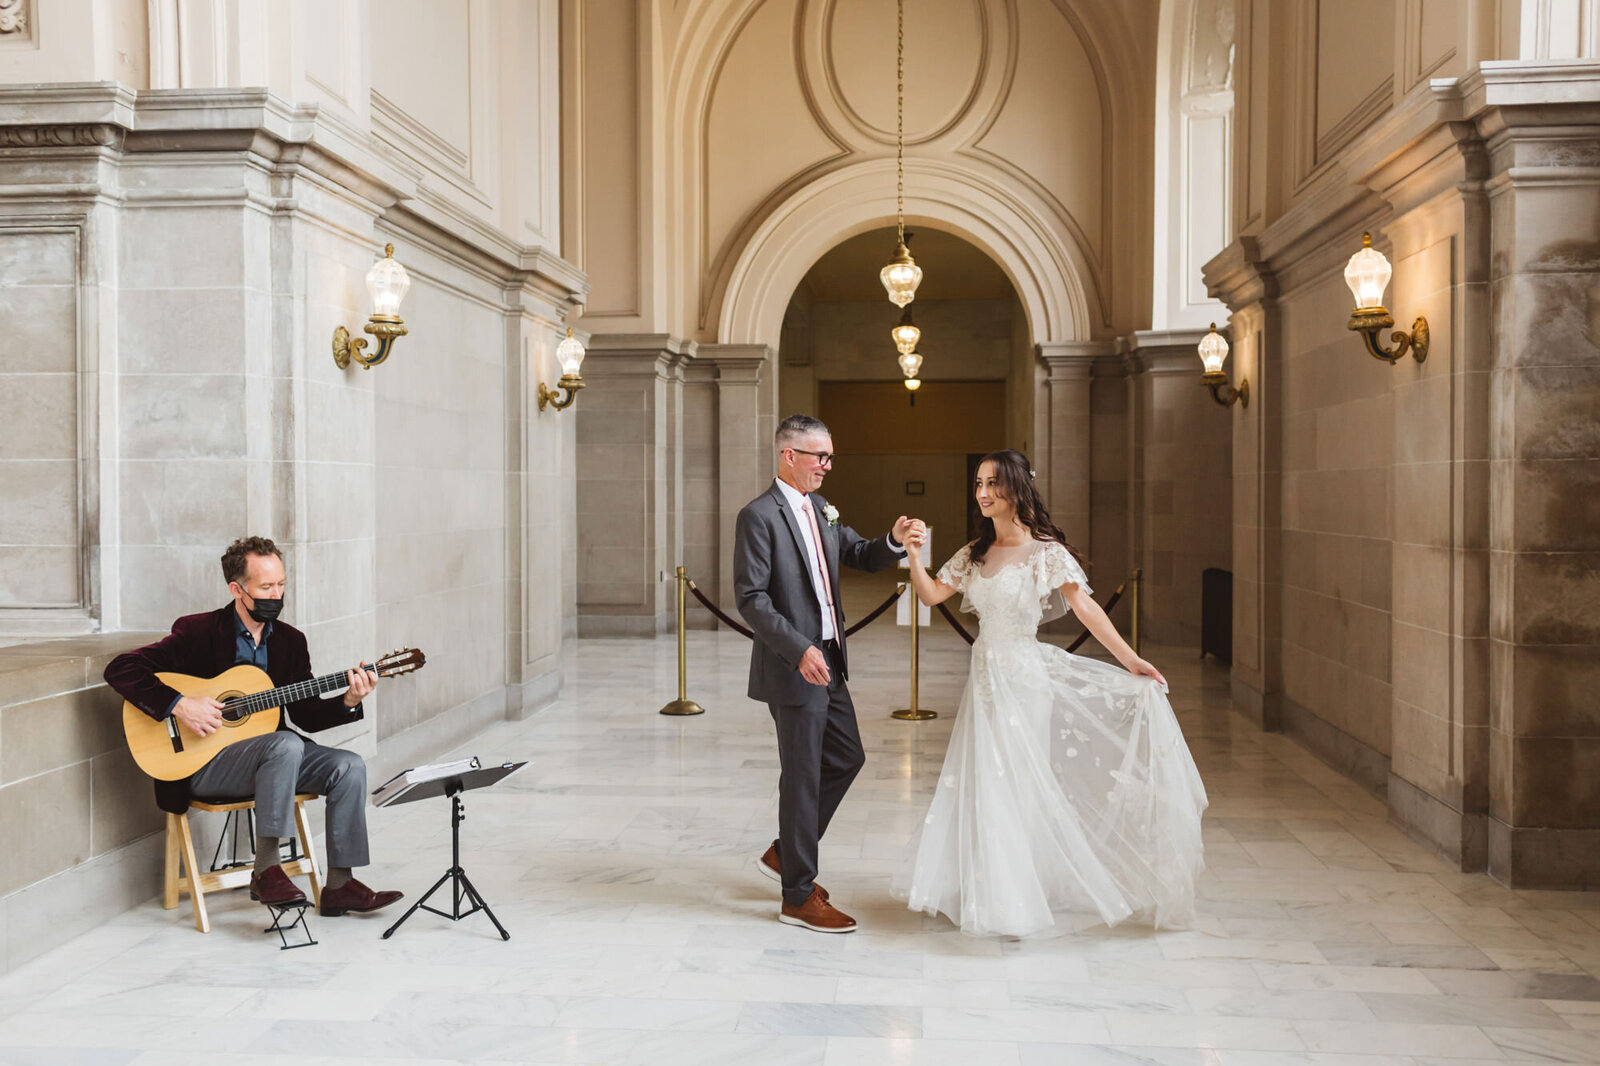 First Dance at Private ceremony at SF City Hall